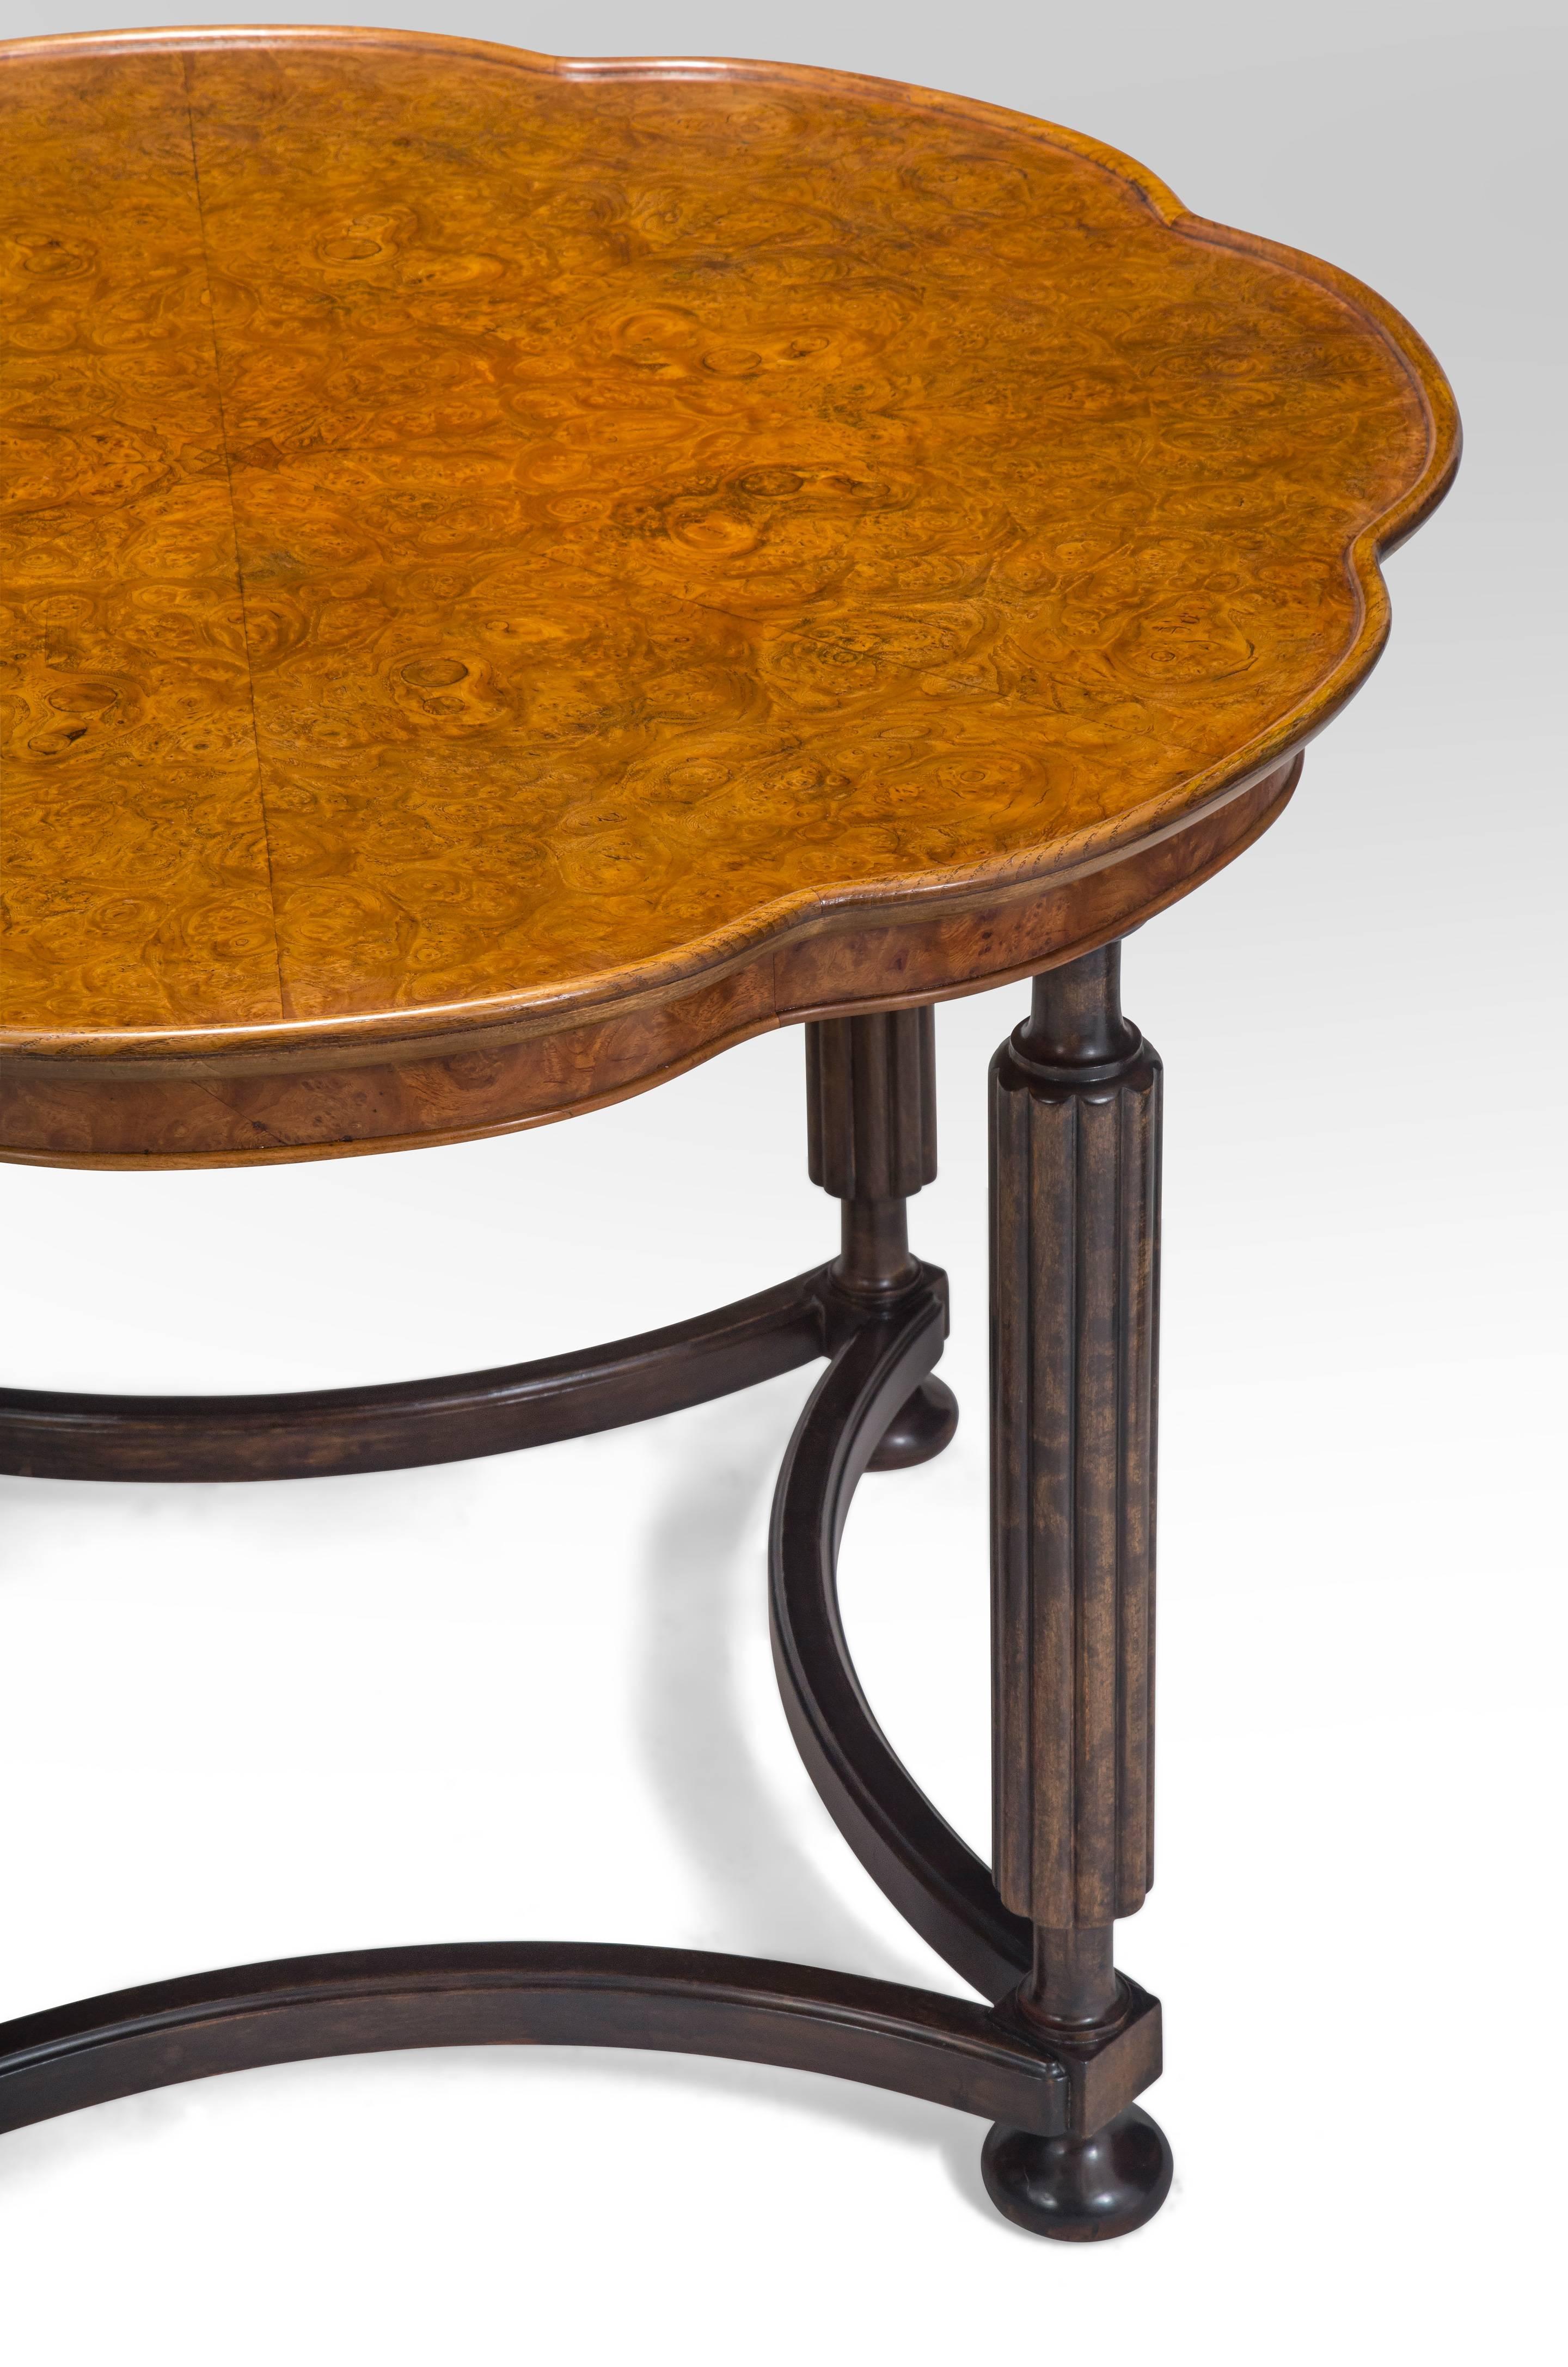 Beautiful table with a lively shaped top and gorgeous burl wood. The octofoil top composed of book-matched burl wood set within a raised molding, on fluted columnar legs connected by concave stretchers, terminating in bun feet. 

In great